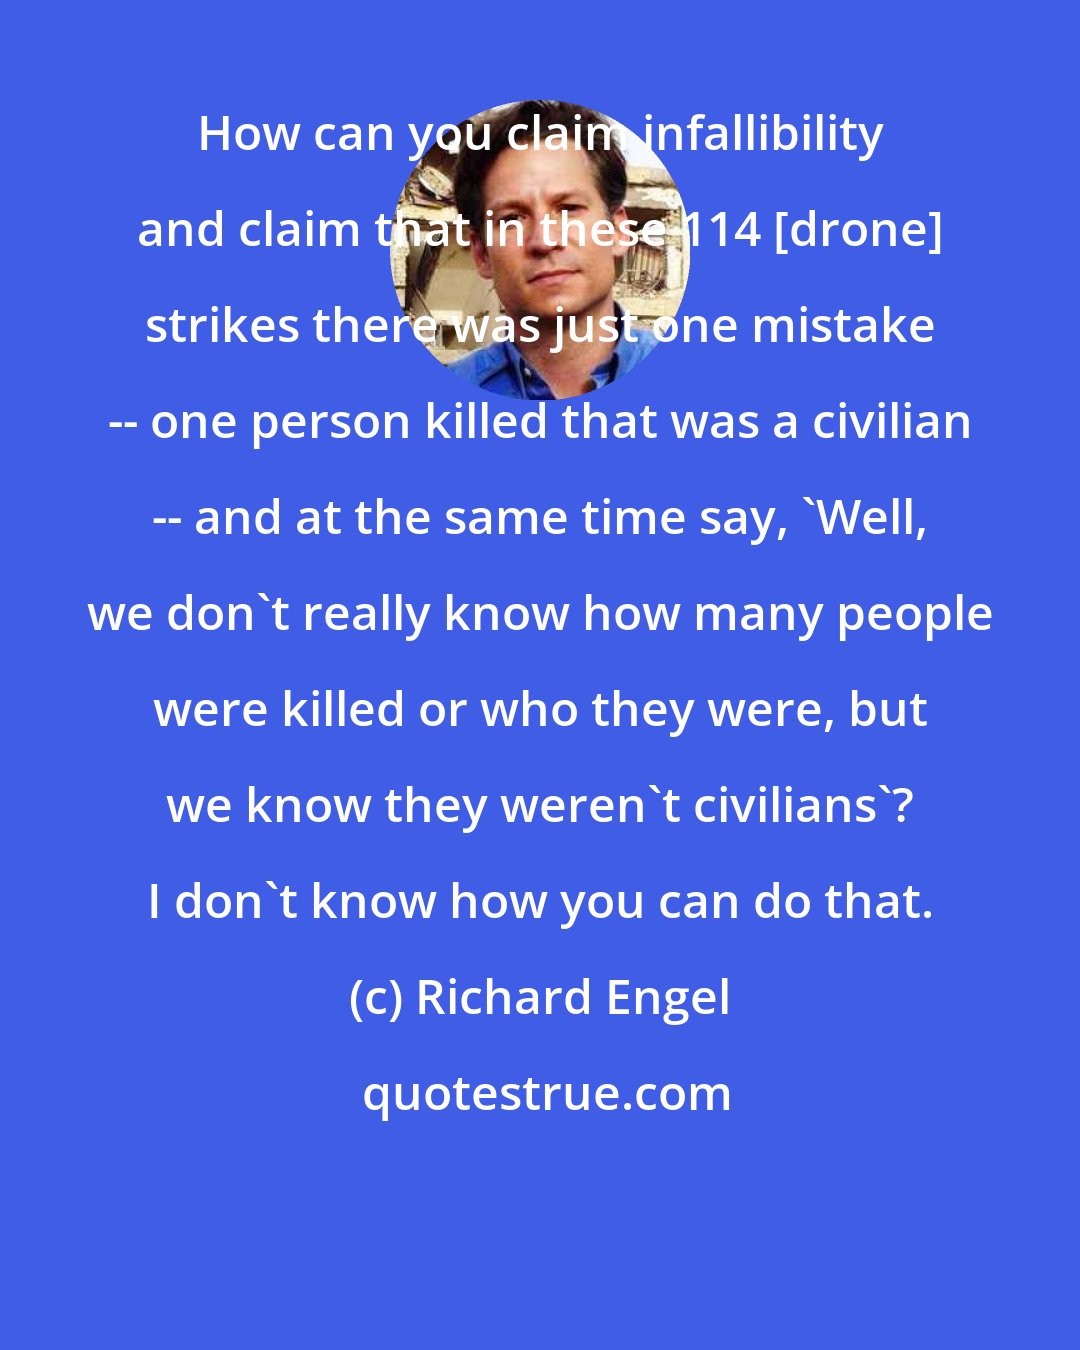 Richard Engel: How can you claim infallibility and claim that in these 114 [drone] strikes there was just one mistake -- one person killed that was a civilian -- and at the same time say, 'Well, we don't really know how many people were killed or who they were, but we know they weren't civilians'? I don't know how you can do that.